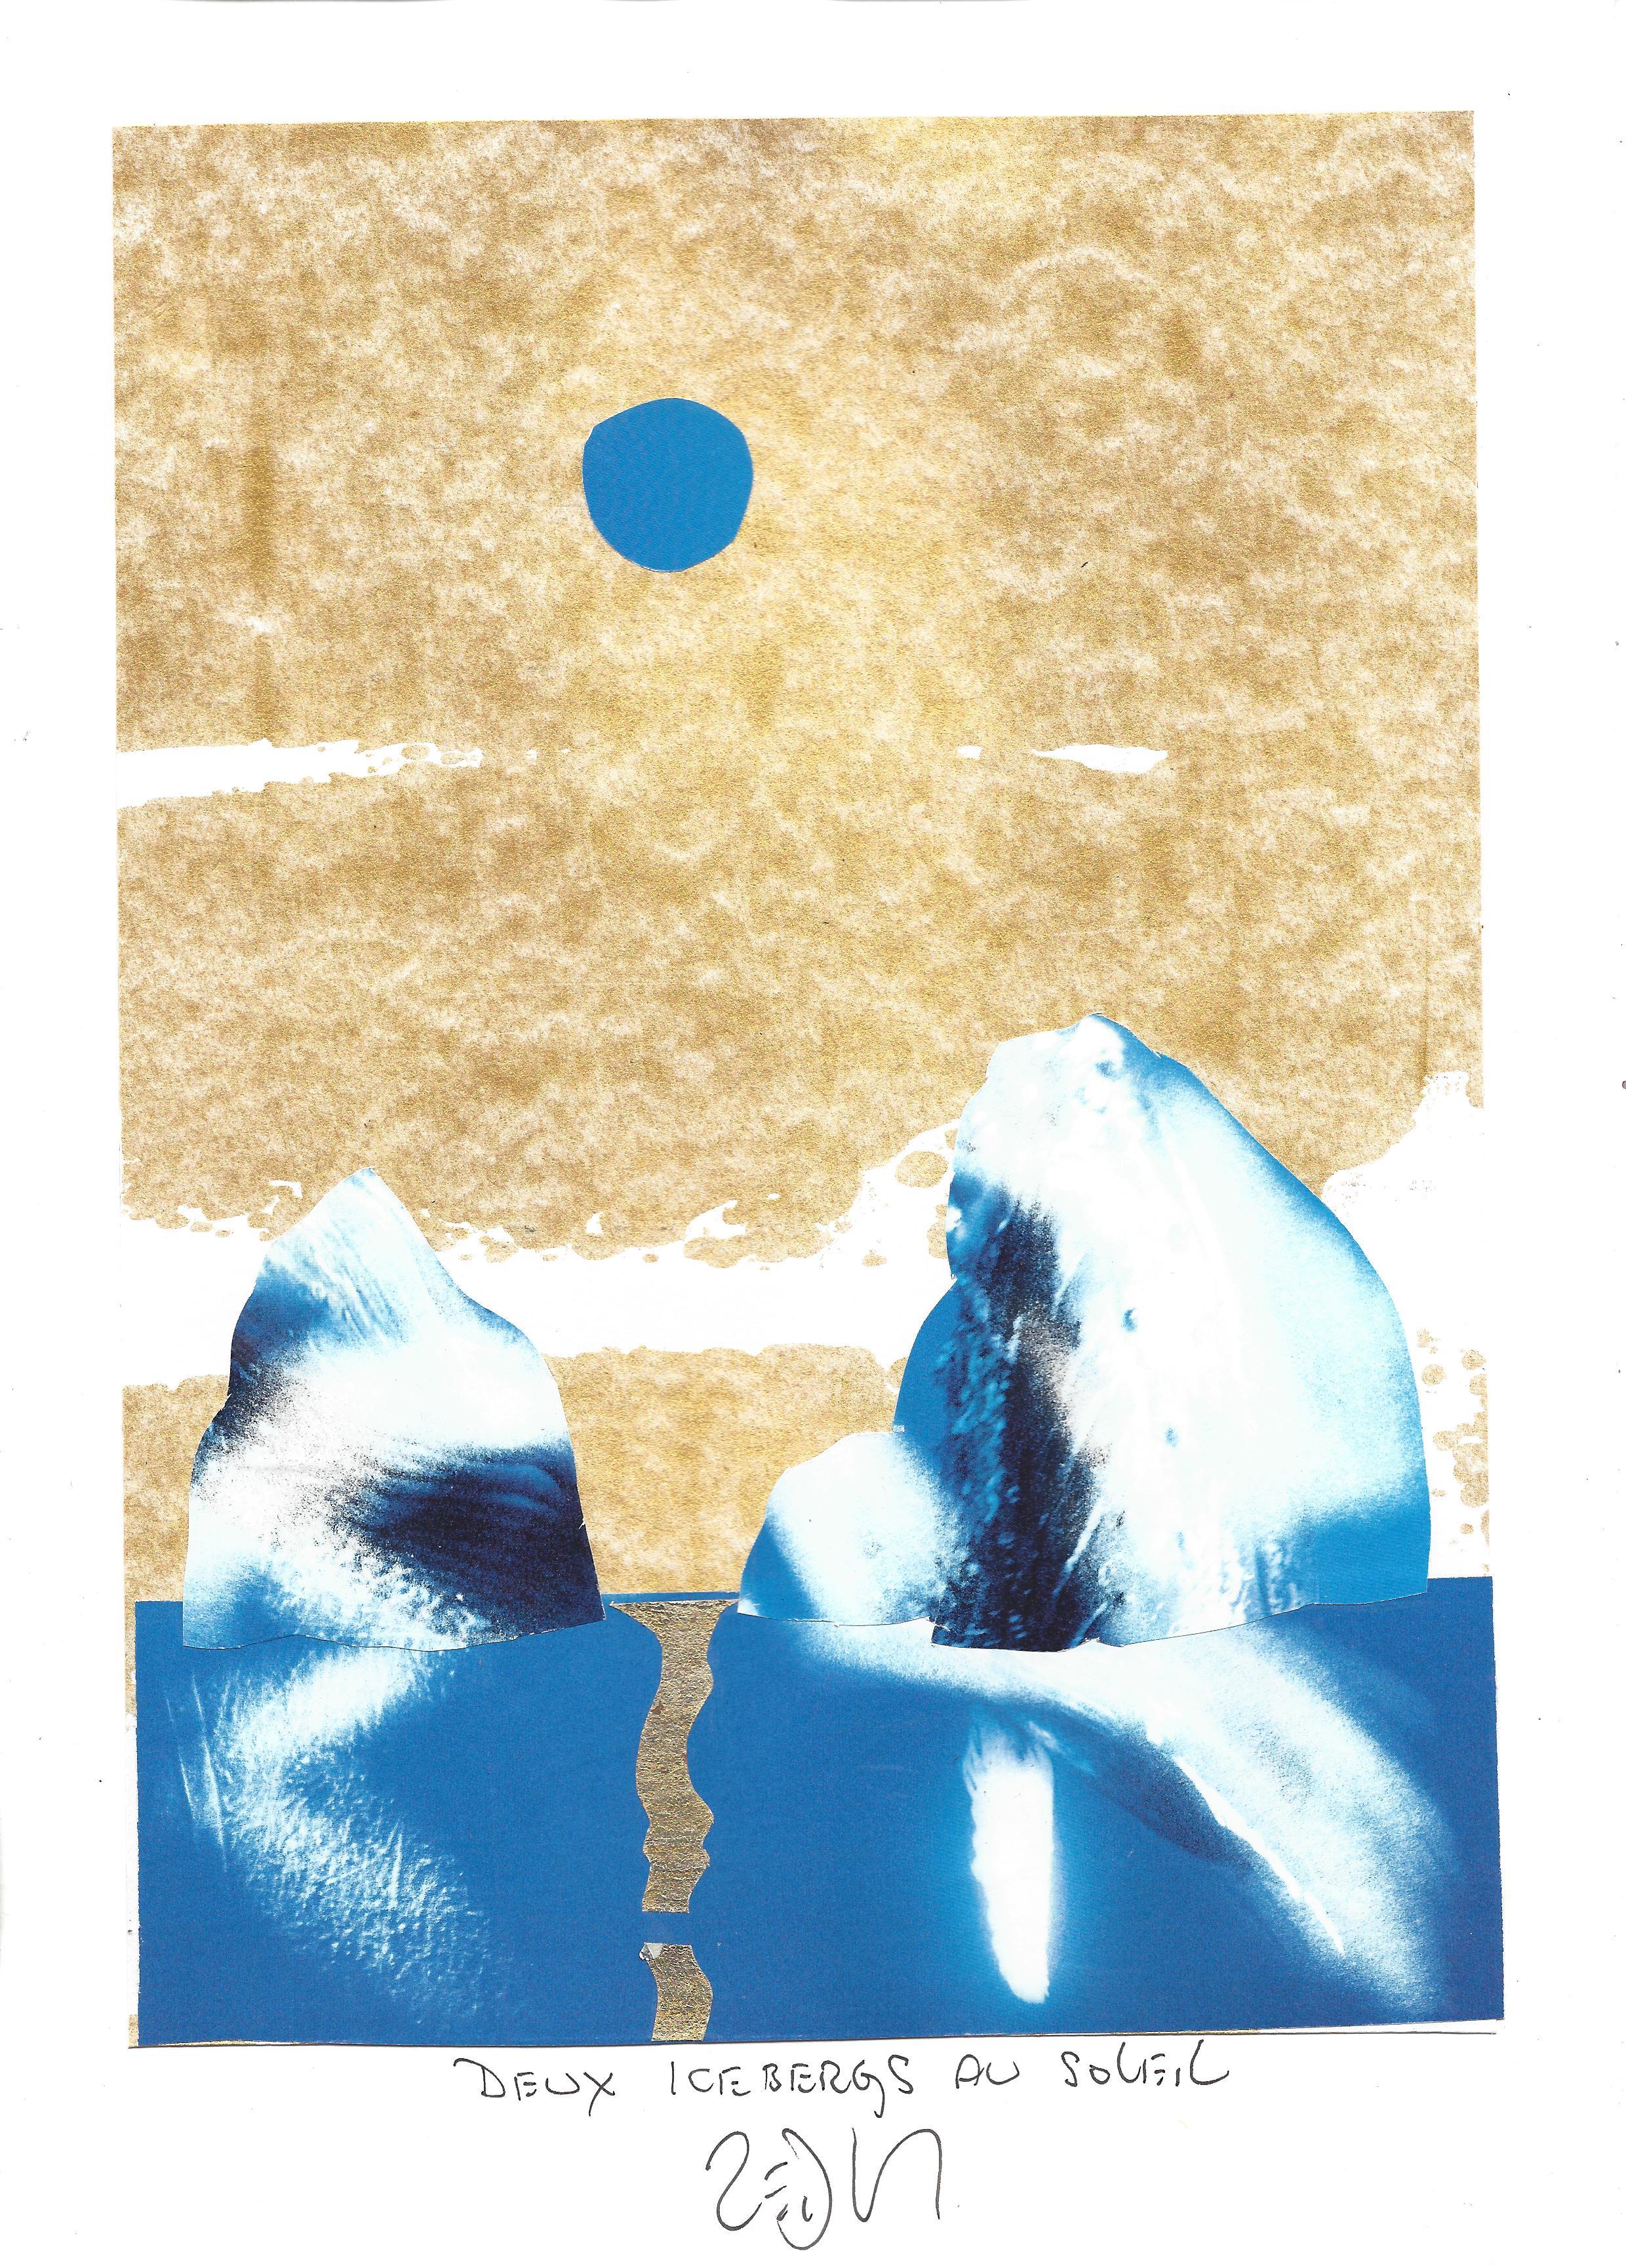 « Two icebergs in the sun – Deux icebergs au soleil »